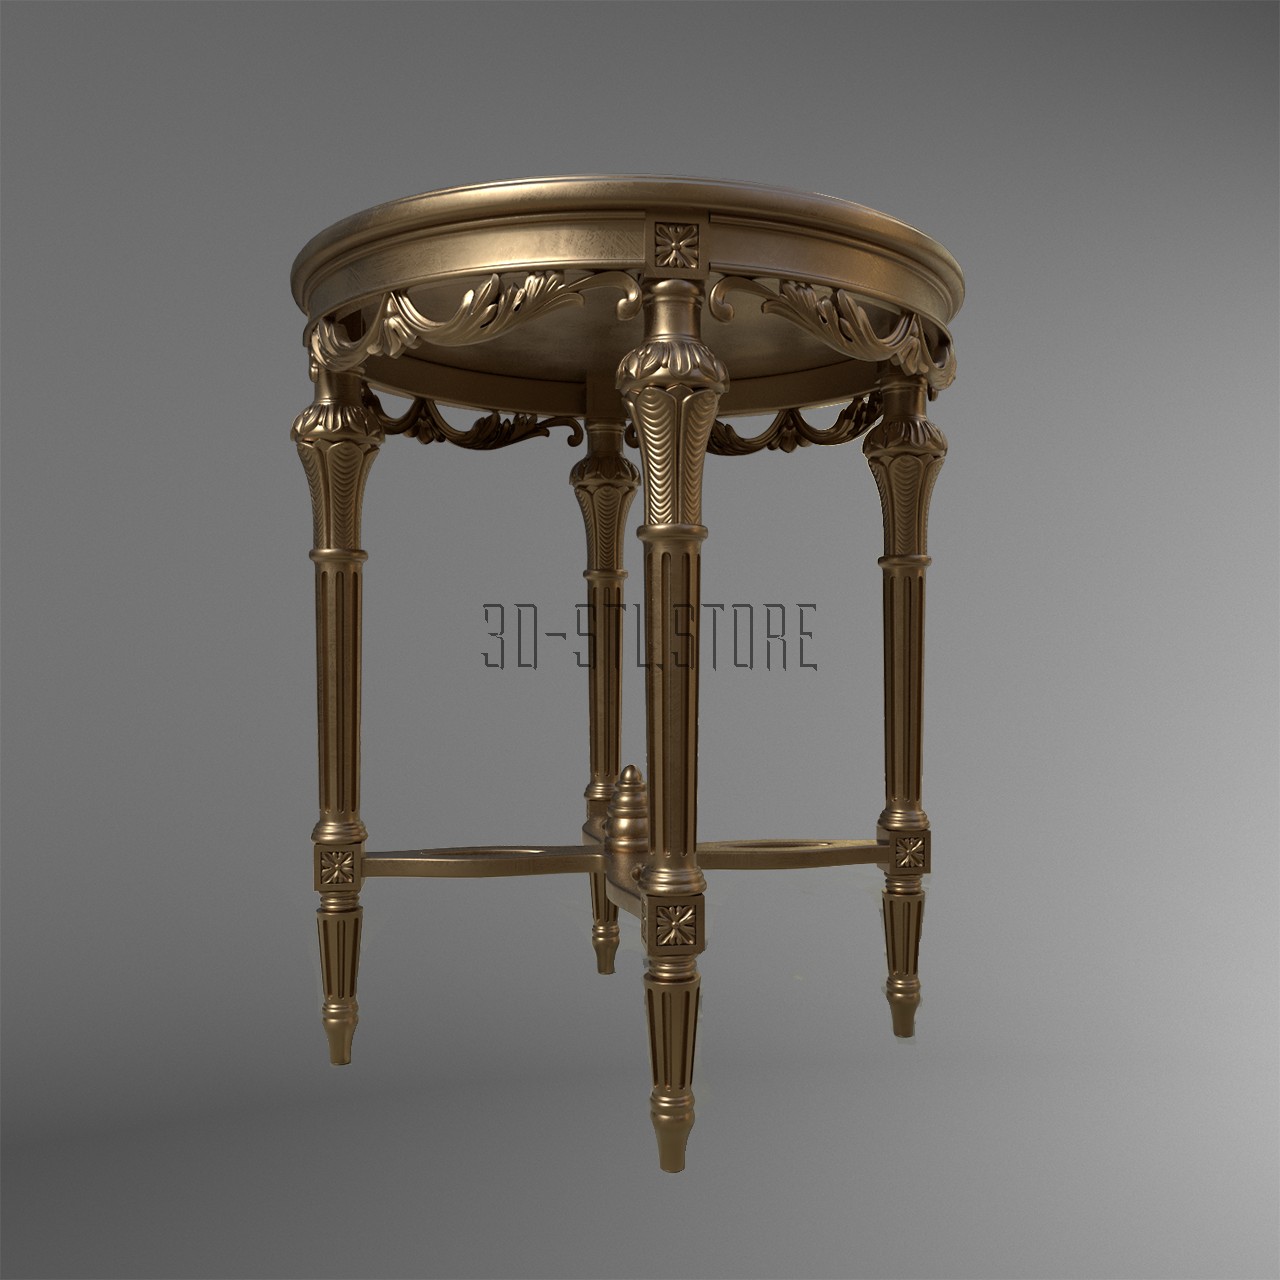 Table with thin legs, 3d models (stl)